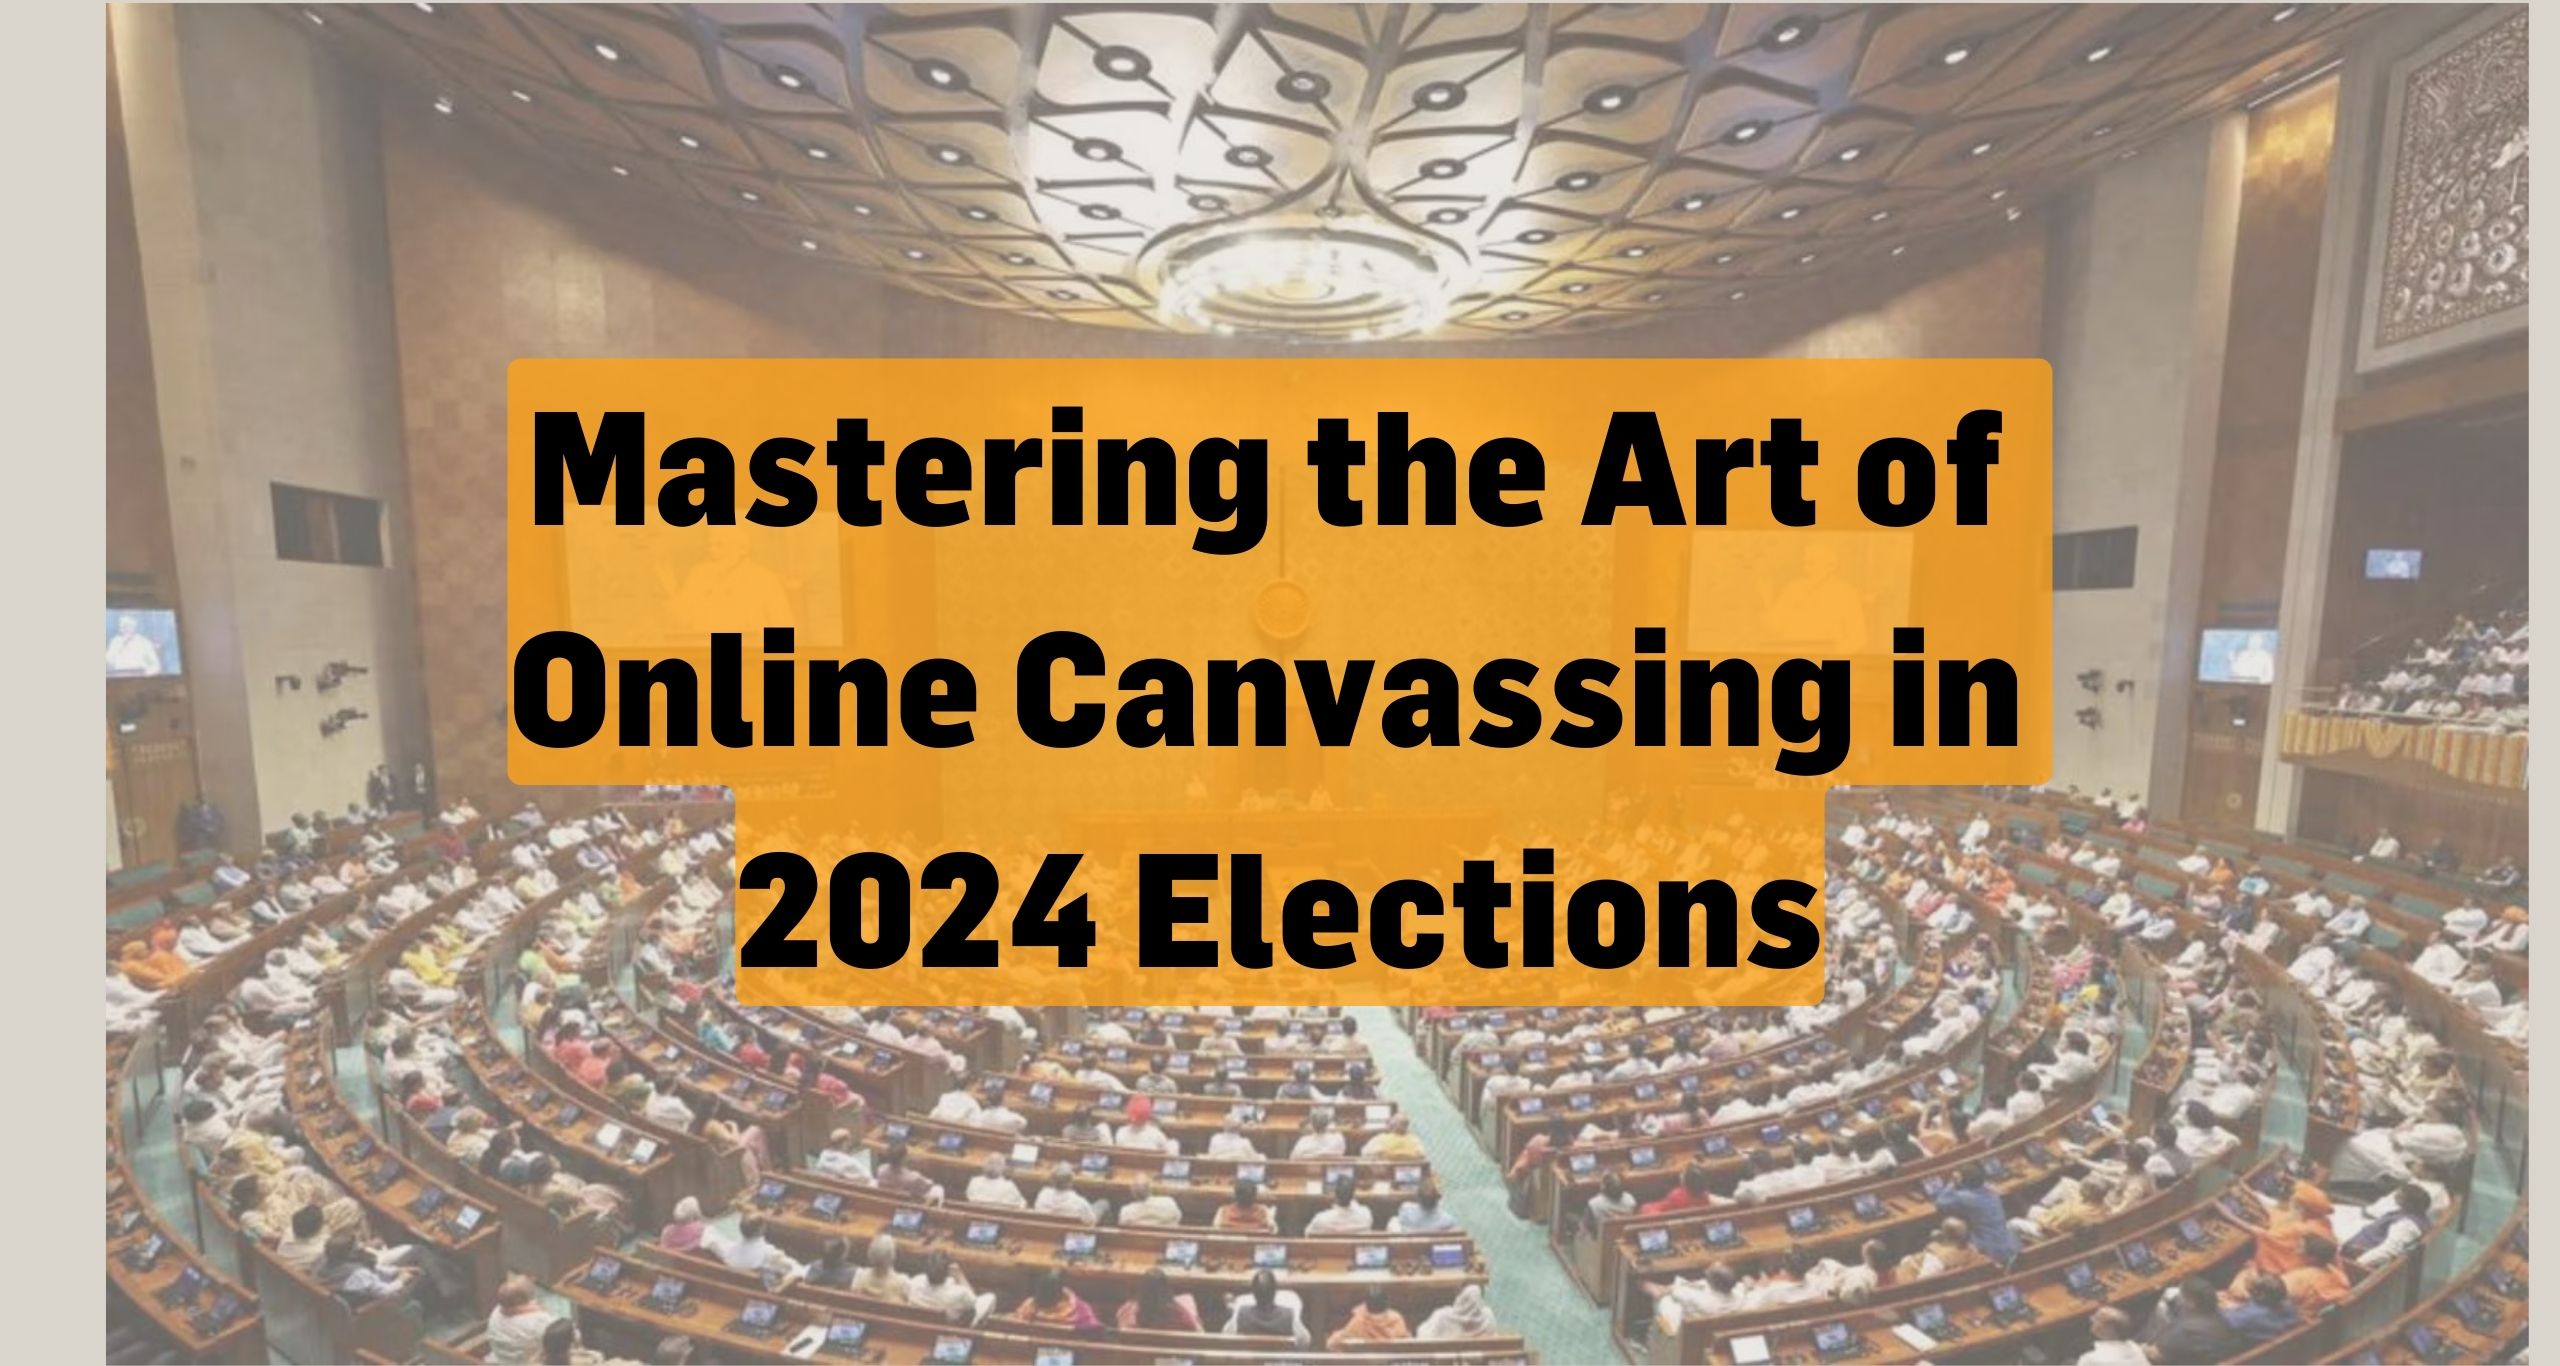 Mastering the Art of ONline Canvassing in 2024 Elections